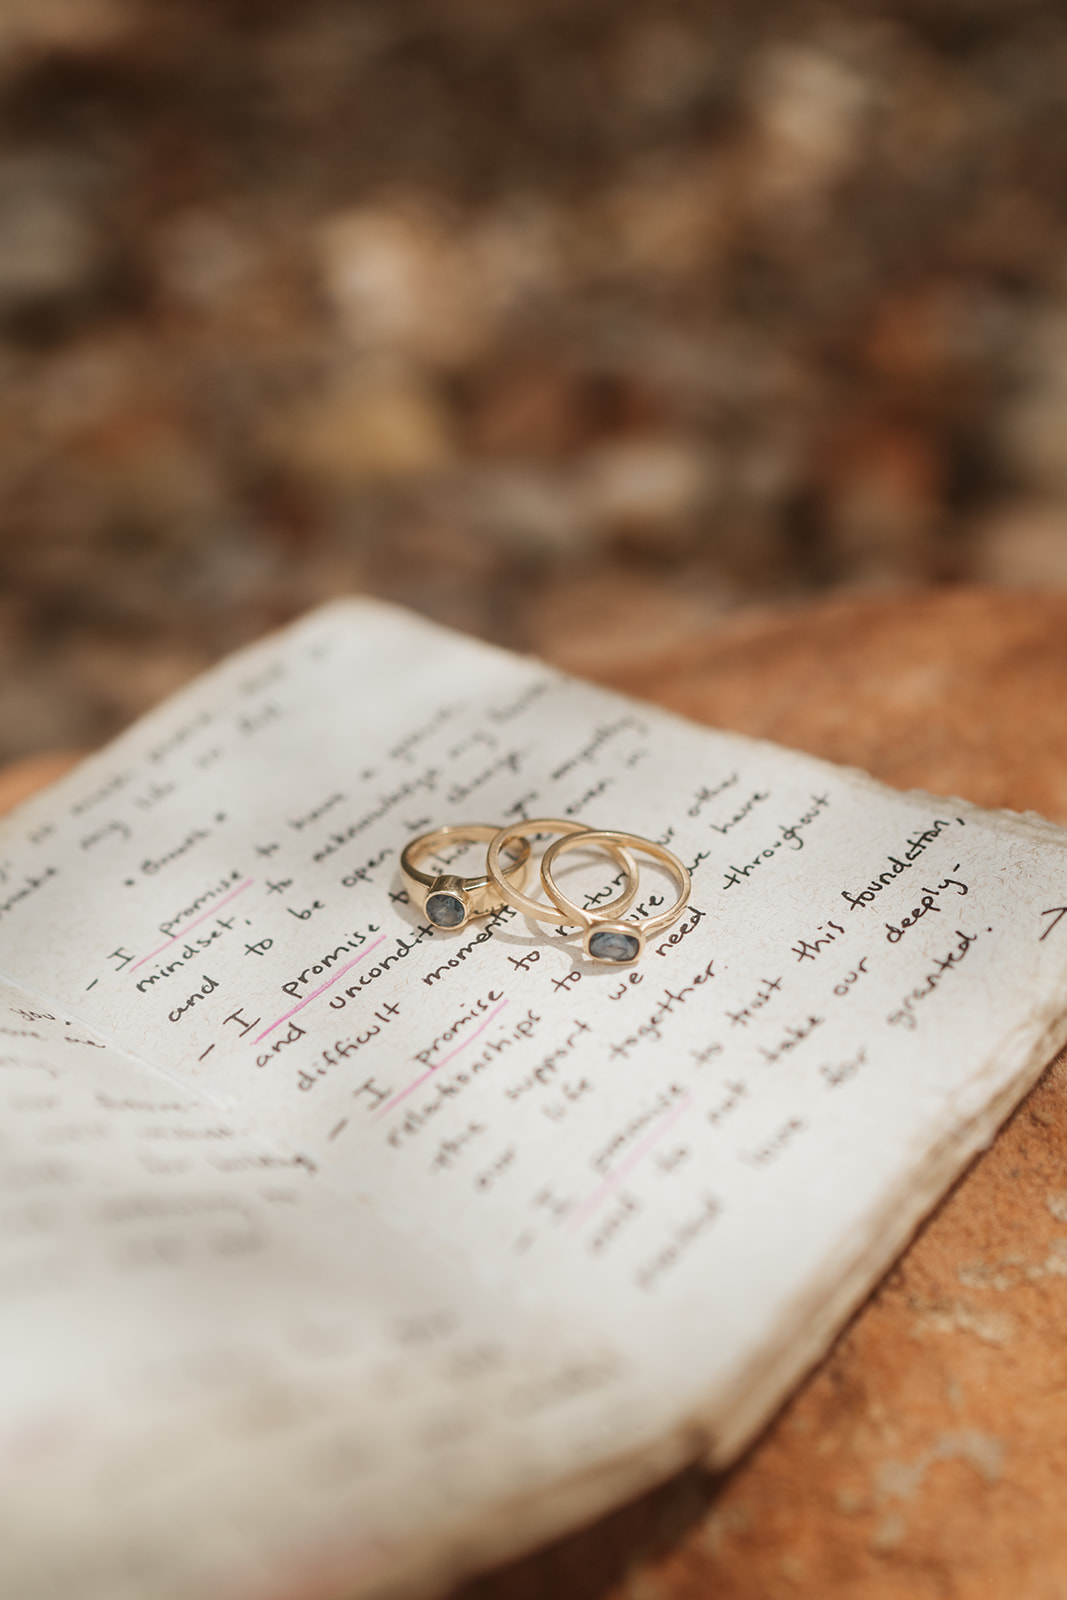 Three wedding rings sitting on a vow book with text written on it. 